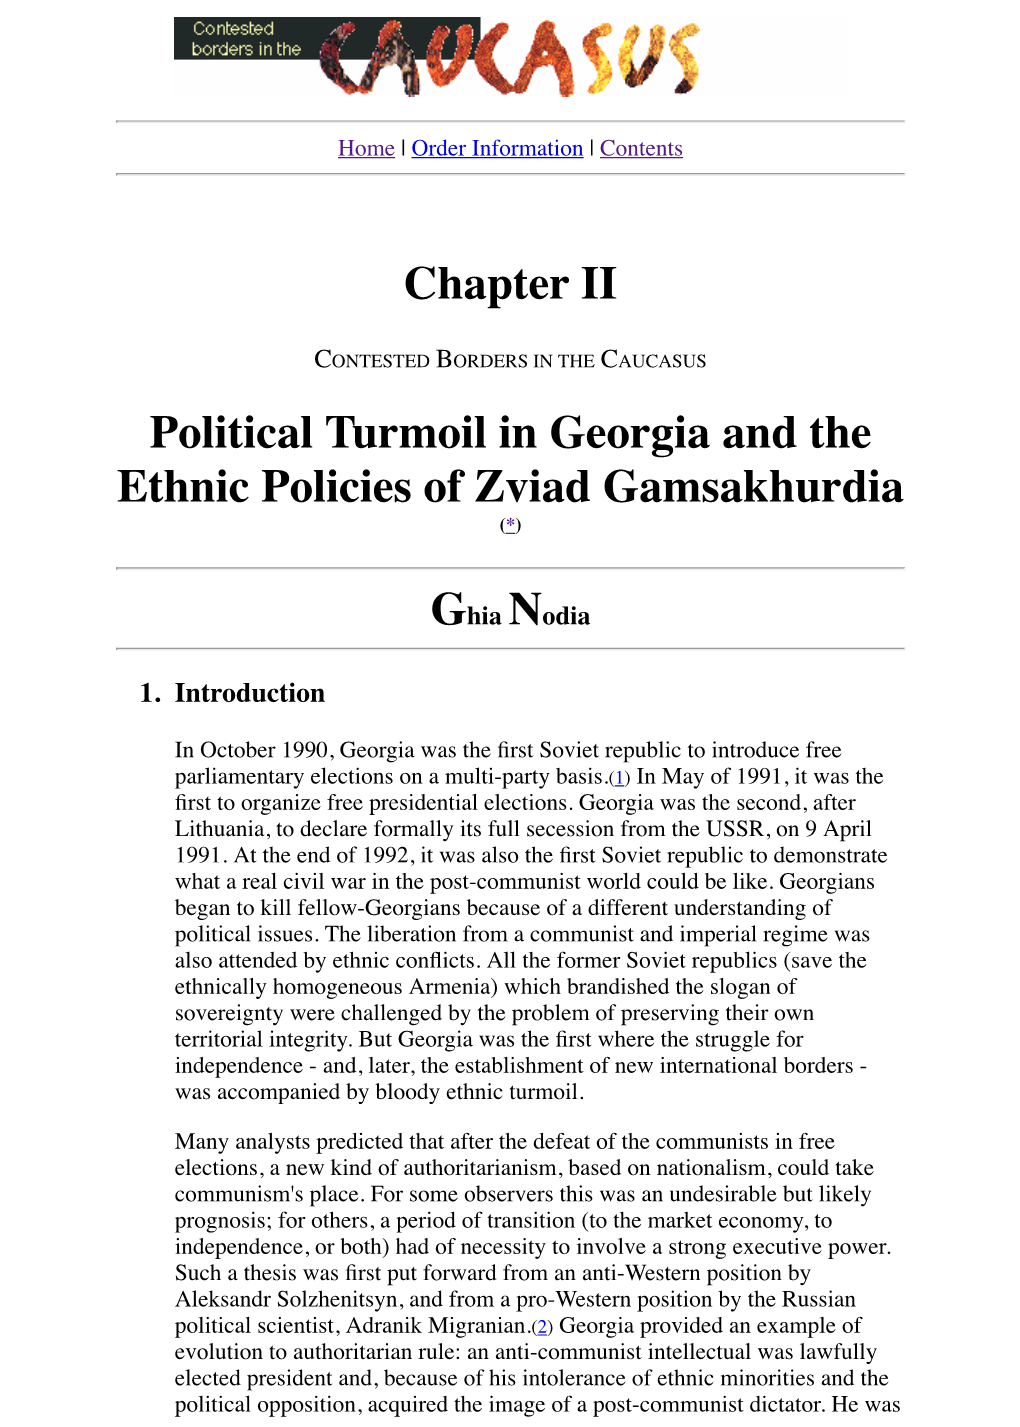 Chapter II Political Turmoil in Georgia and the Ethnic Policies of Zviad